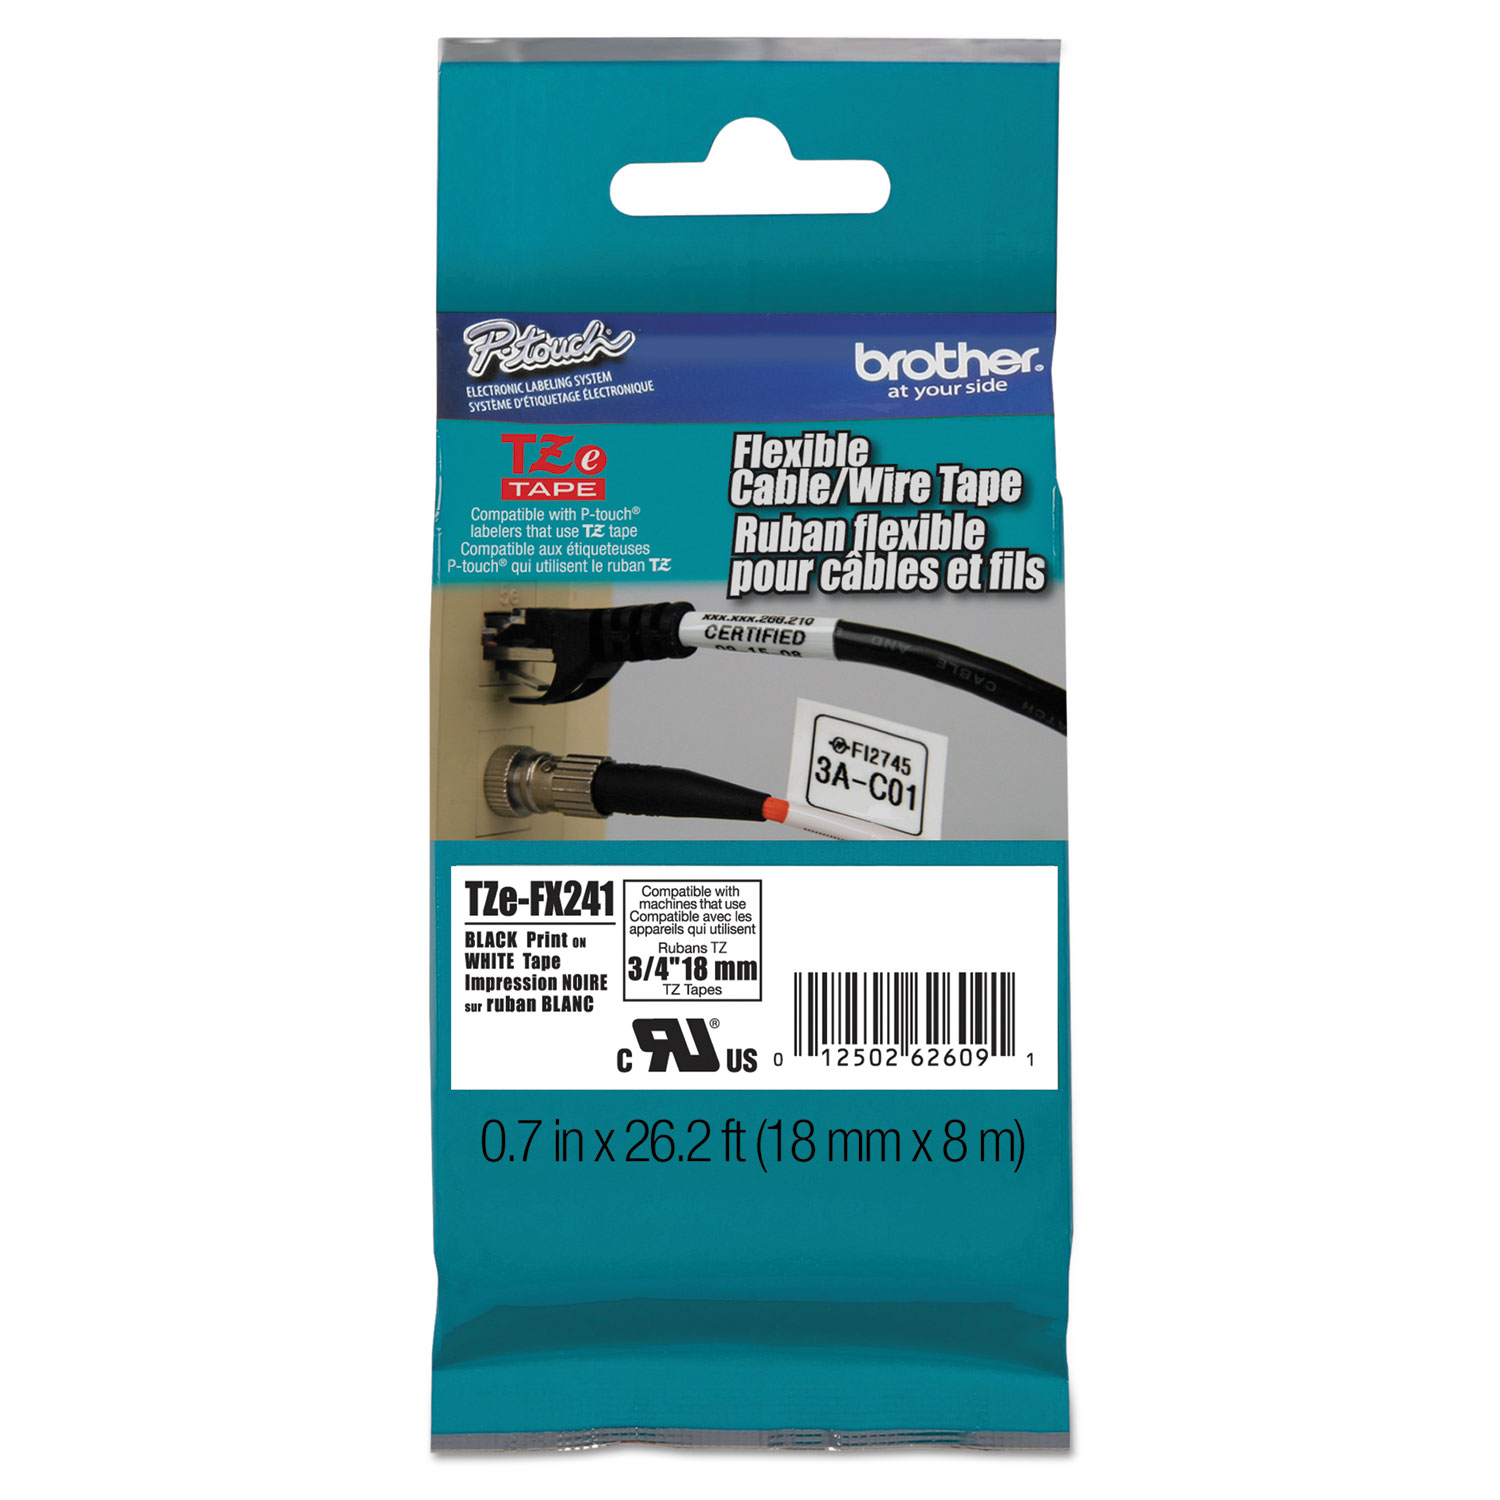  Brother P-Touch TZEFX241 TZe Flexible Tape Cartridge for P-Touch Labelers, 0.7 x 26.2 ft, Black on White (BRTTZEFX241) 